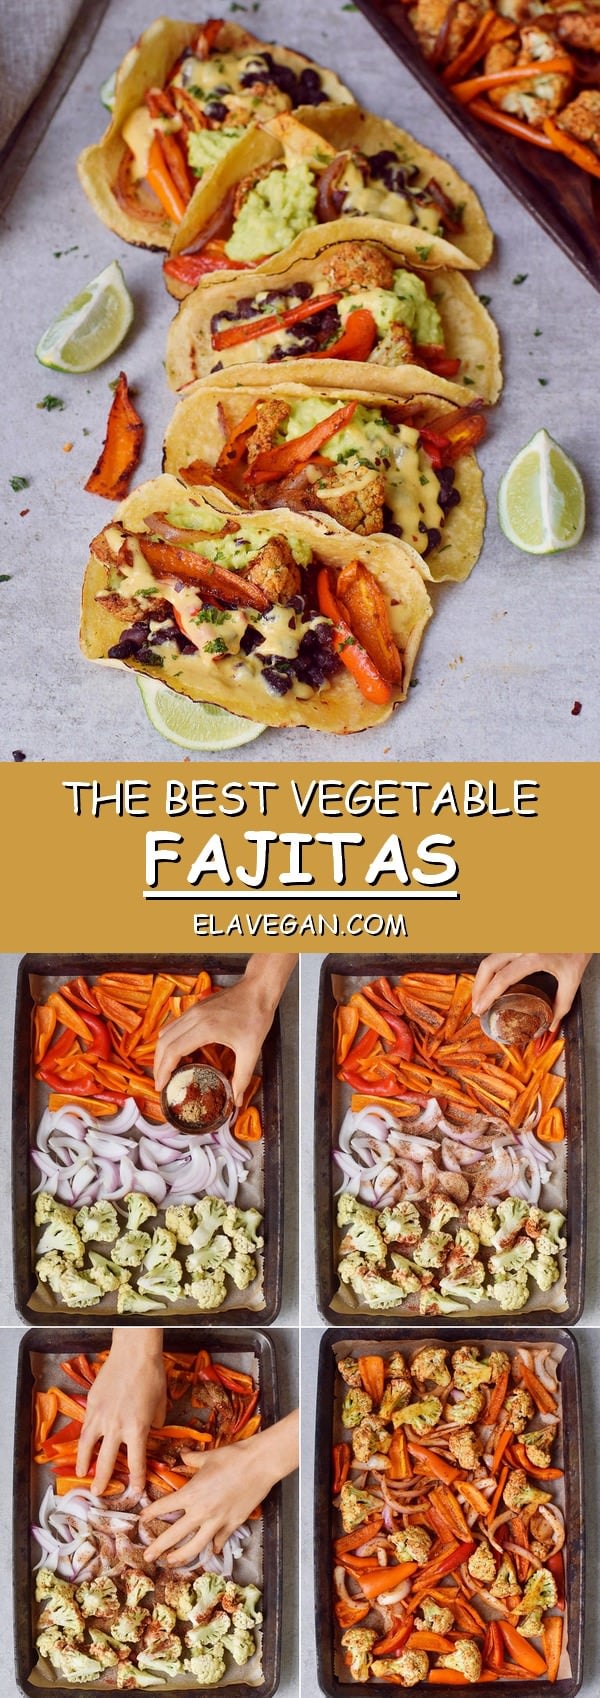 the best vegetable fajitas with roasted cauliflower and peppers